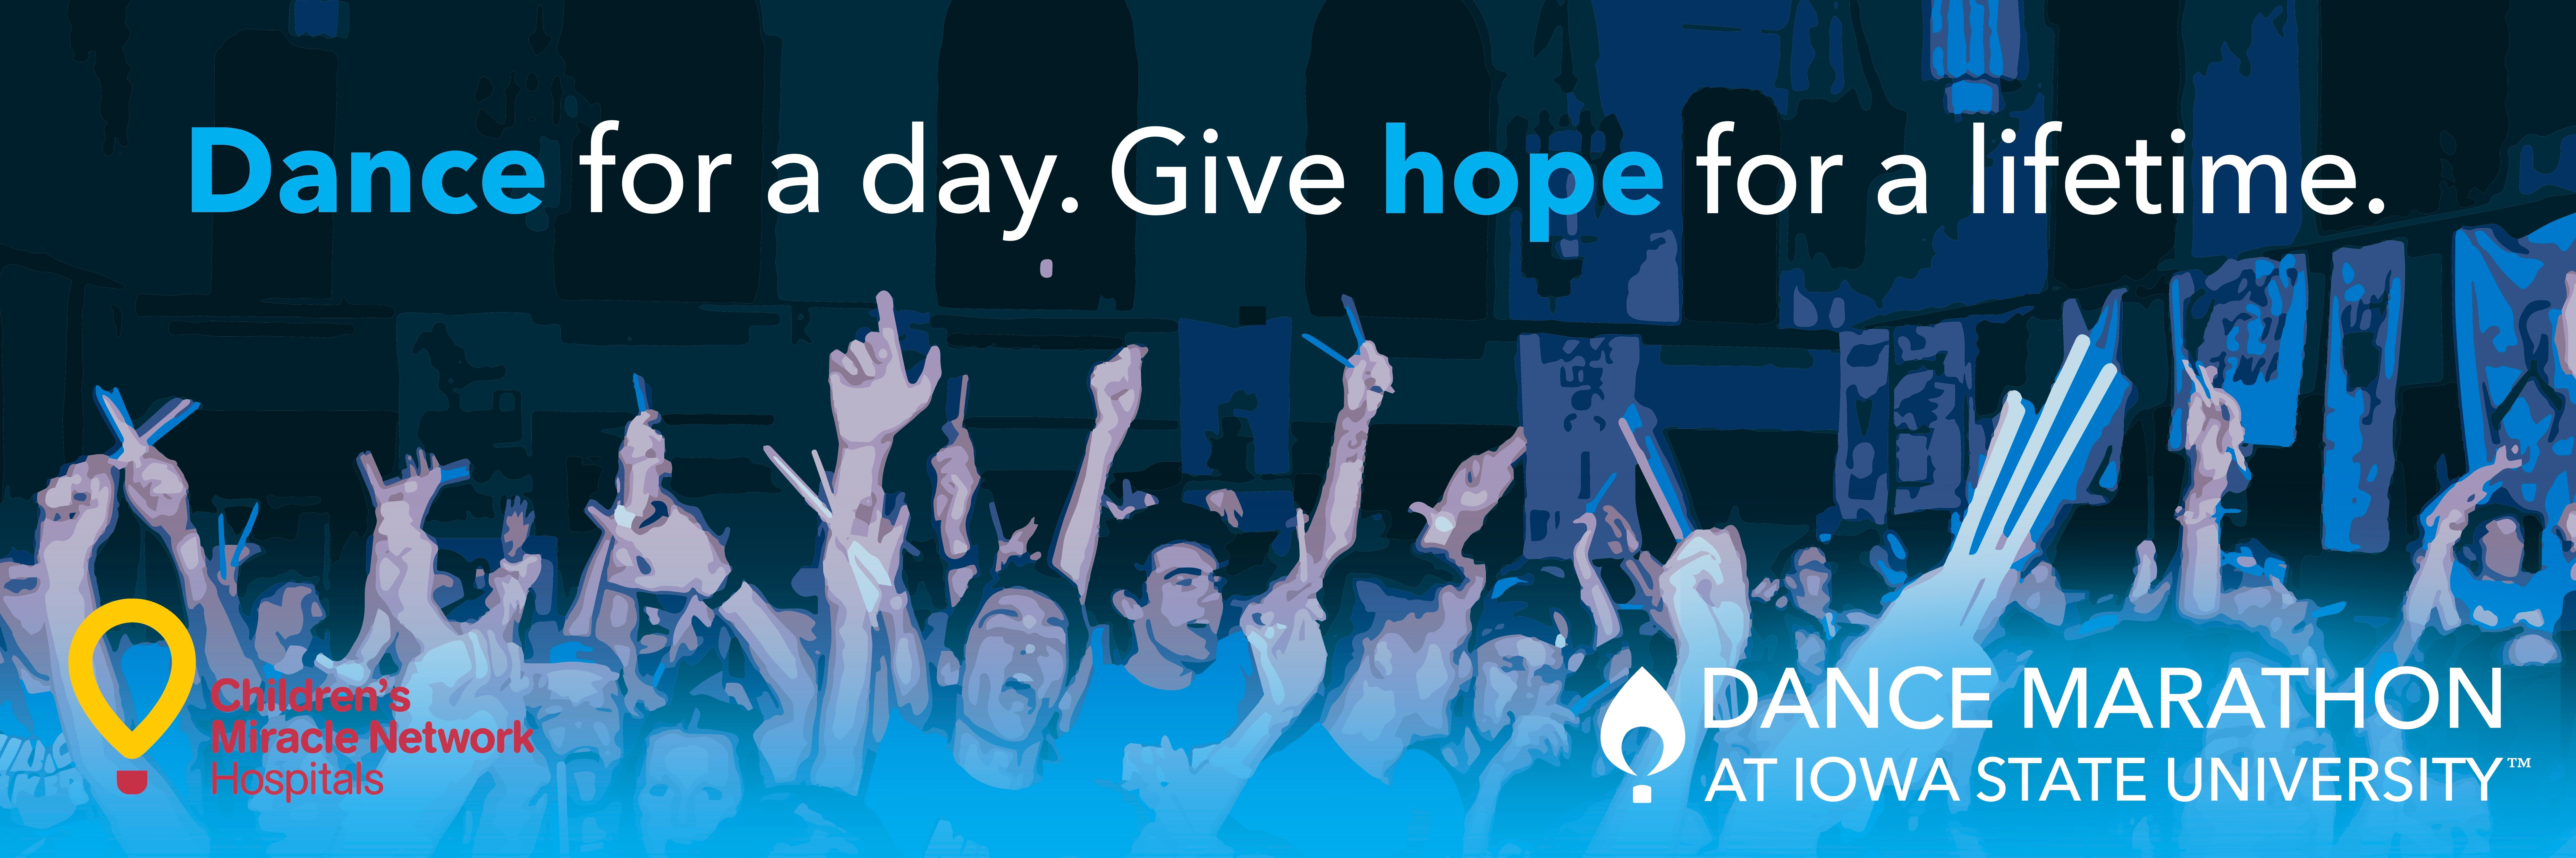 Image of people dancing at a big event  and the Dance Marathon at ISU logo. Text over image says Dance for a day. Give hope for a lifetime.